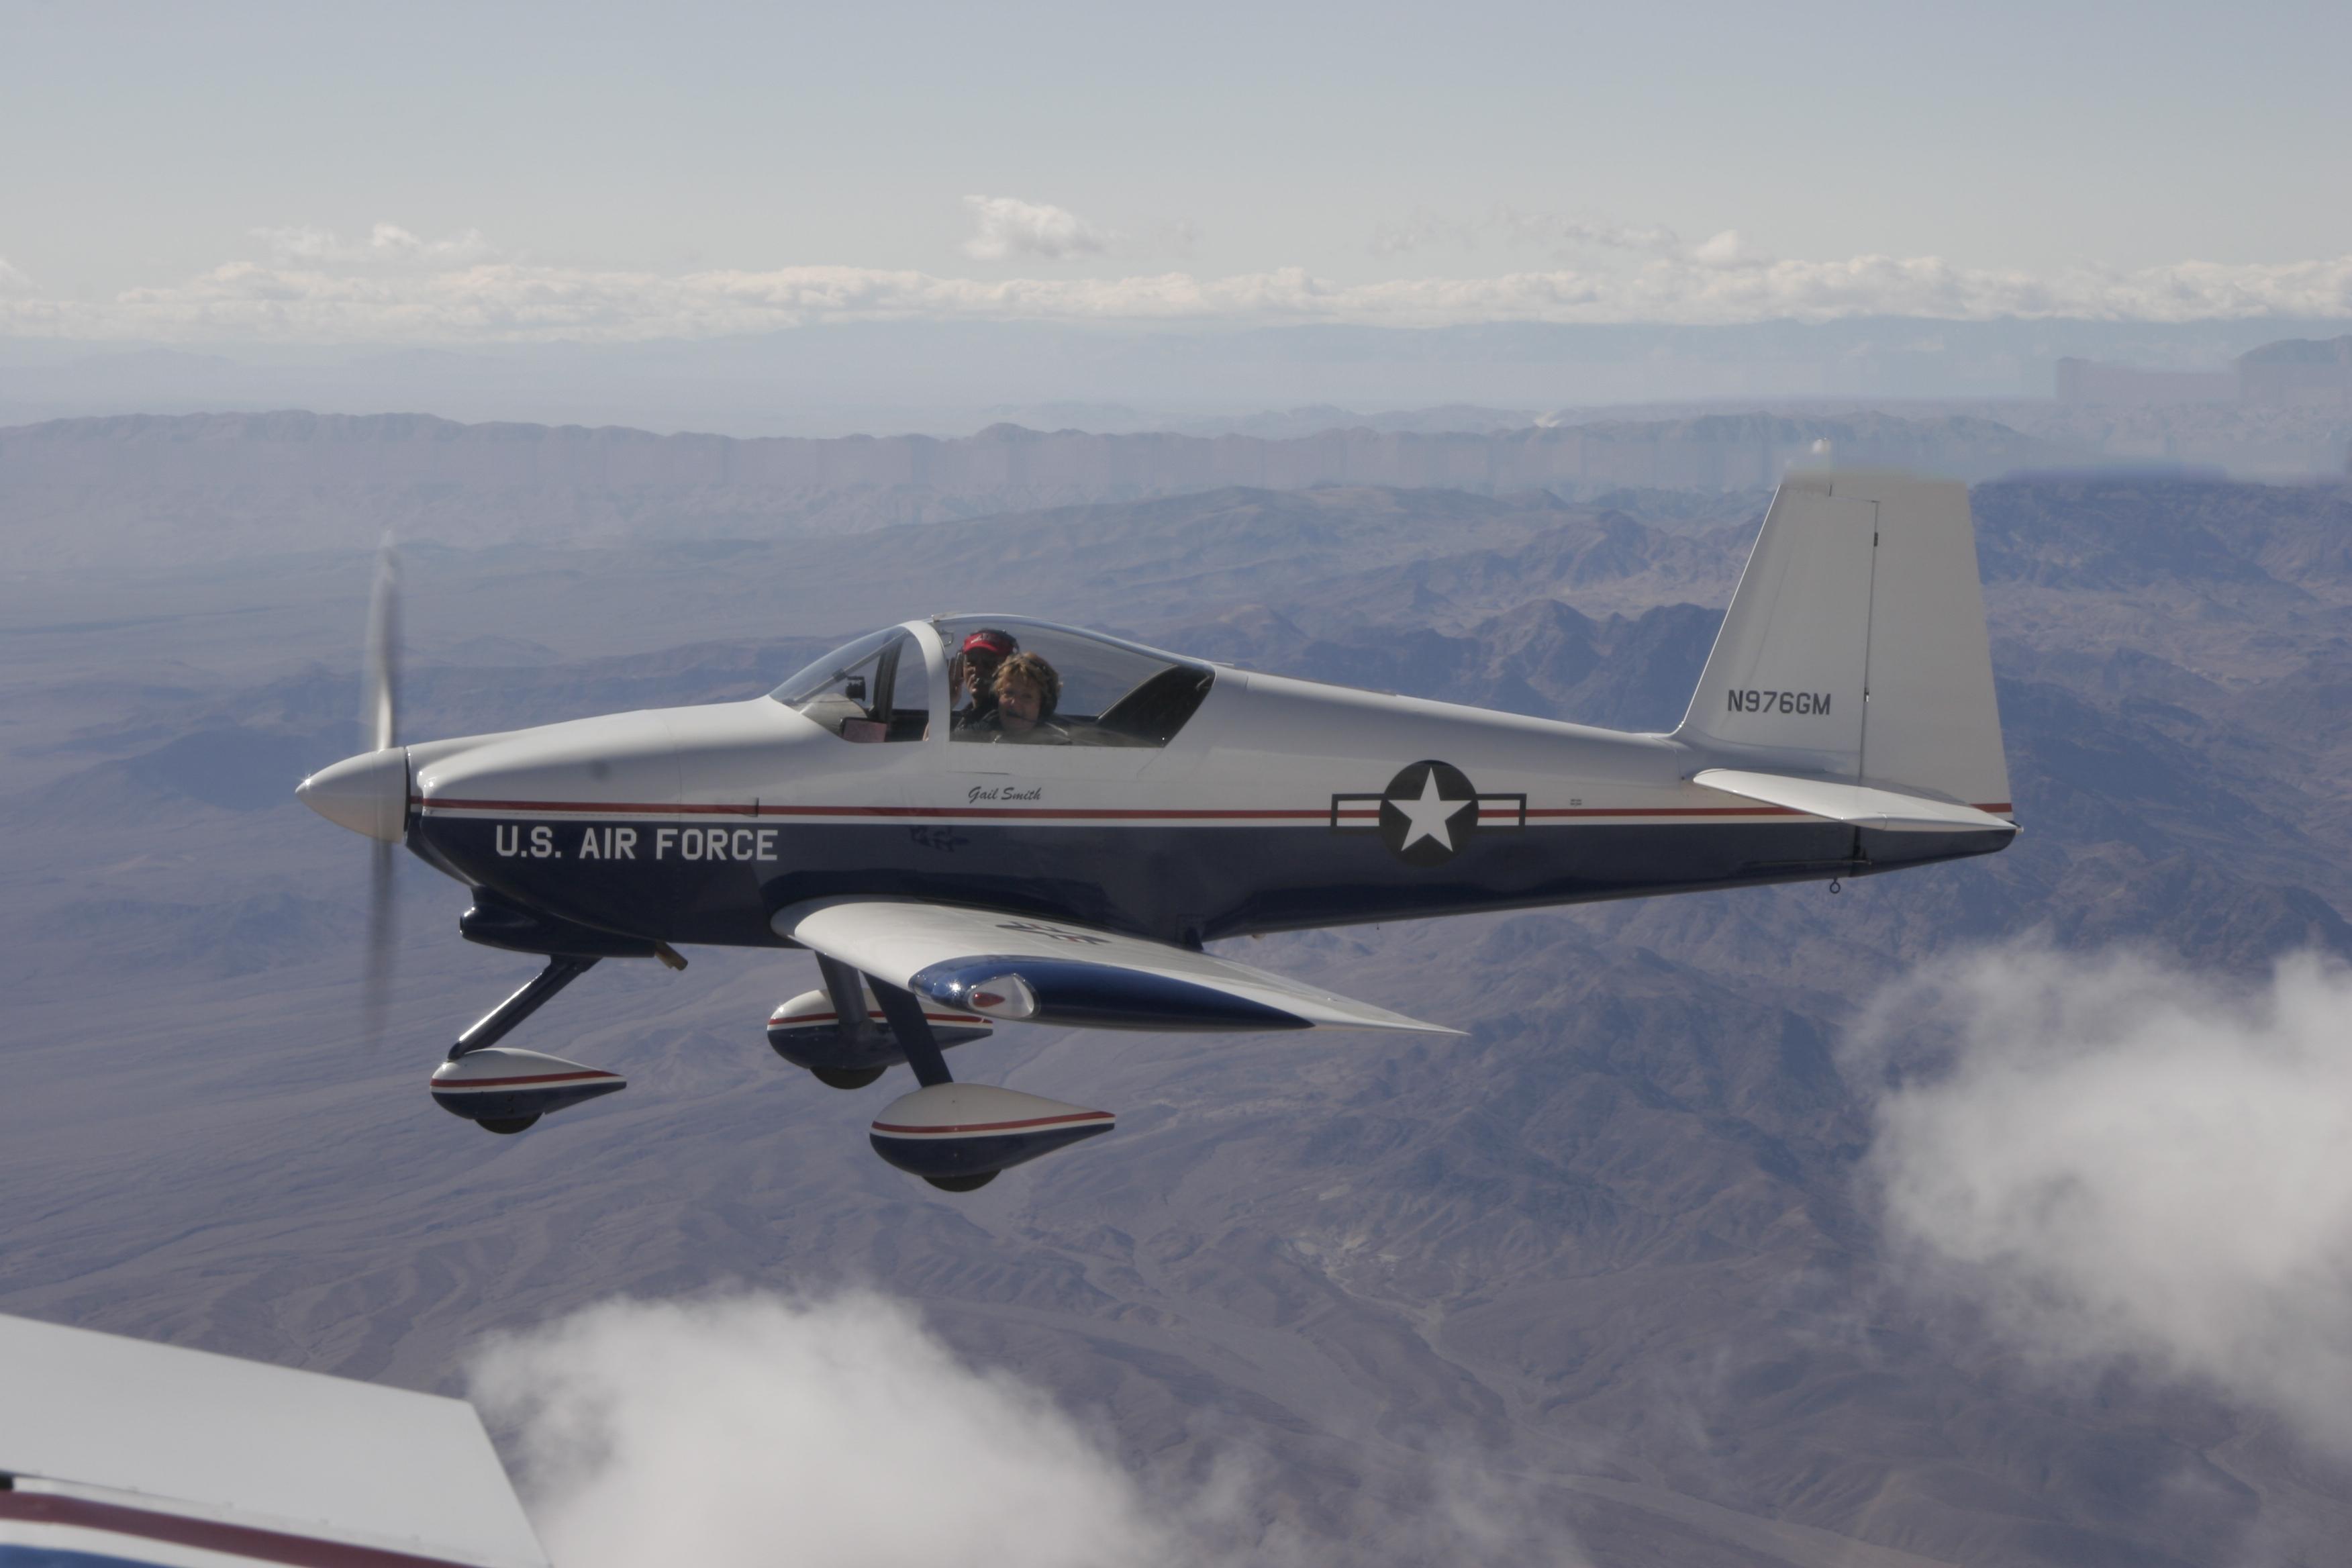 Mike Smith's RV-7A